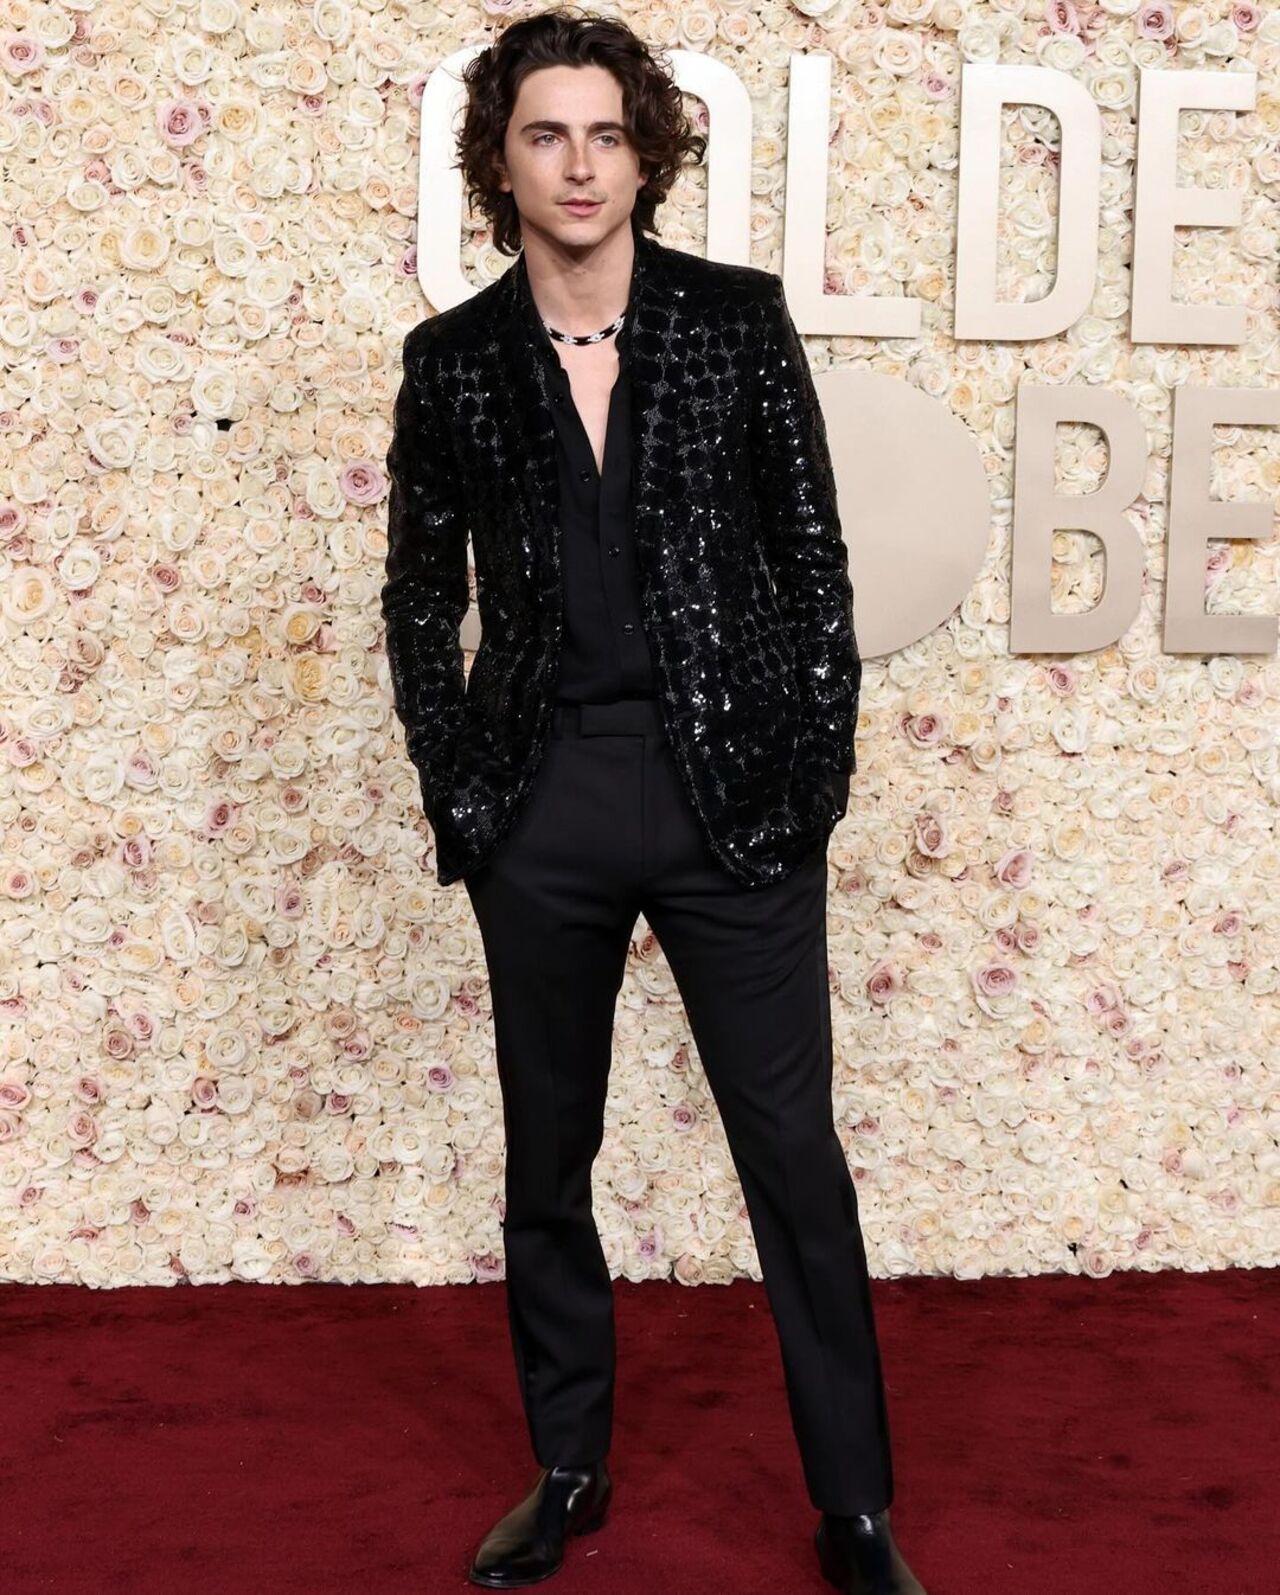 Timothee Chalamet wore a black suit and stood out with the bling element on them. The actor made headline for his heartwarming moments with girlfriend Kylie Jenner